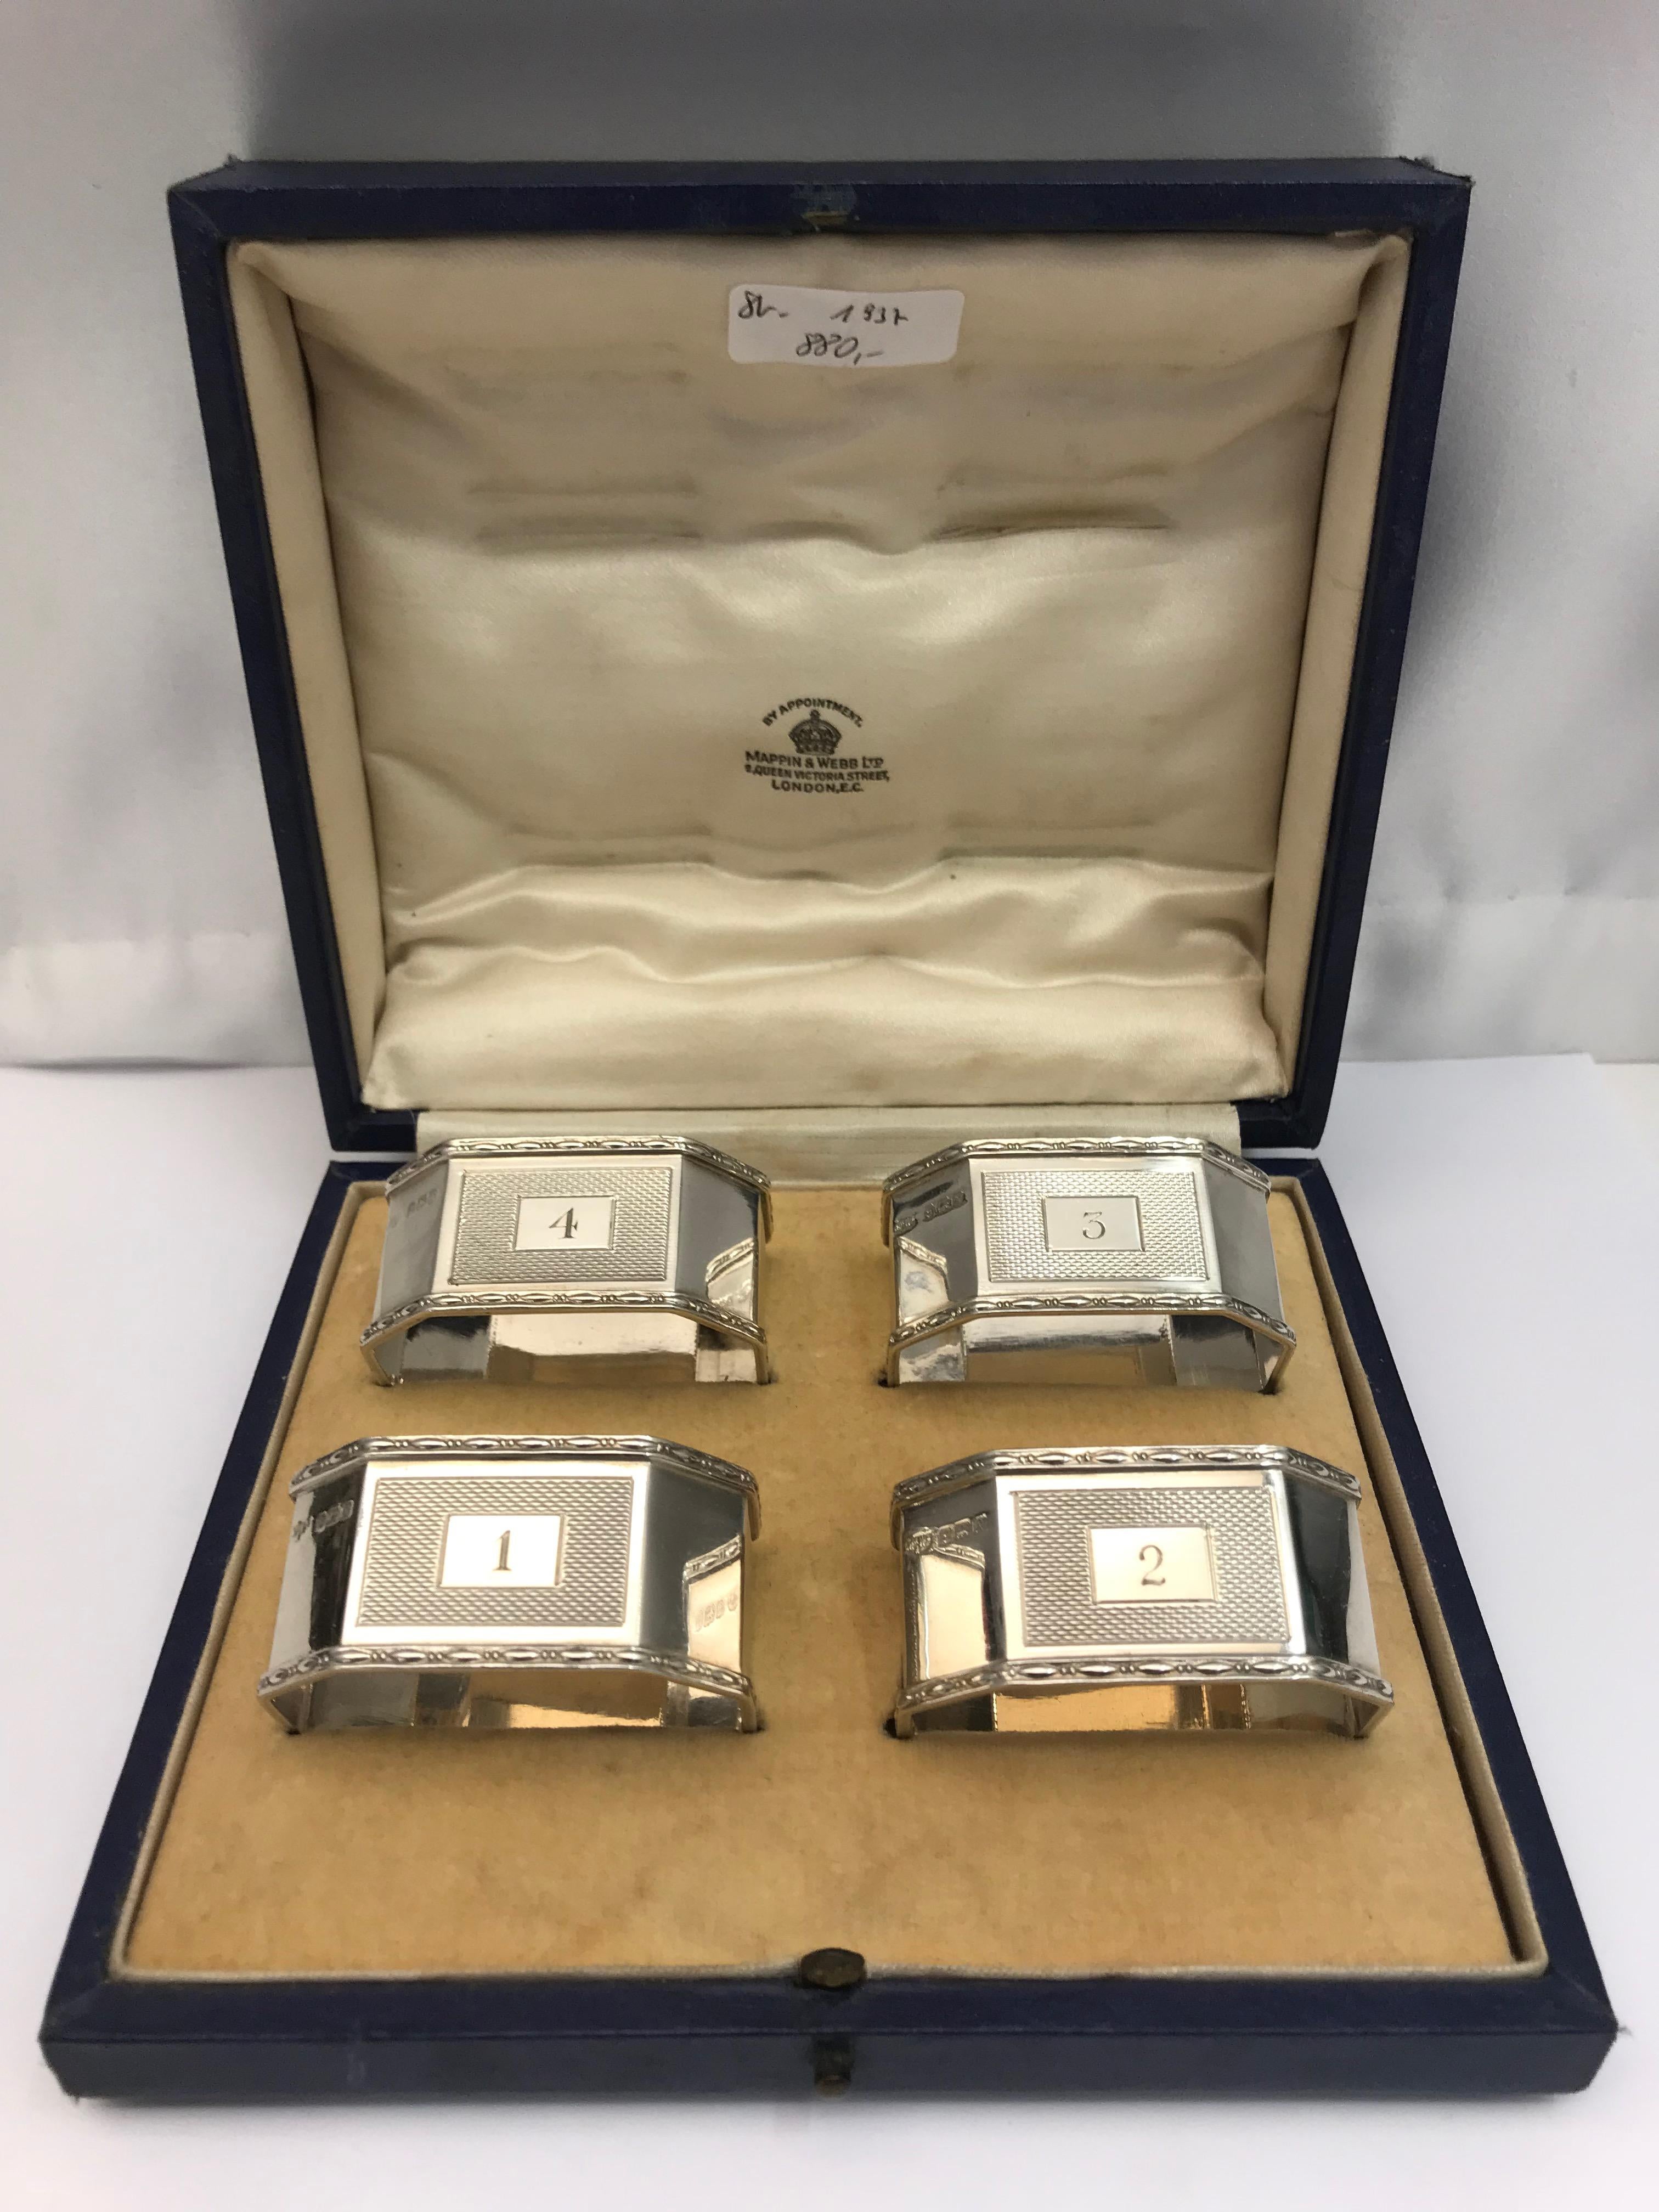 Antique Silver Napkin Rings with Original Box In Good Condition For Sale In London, London